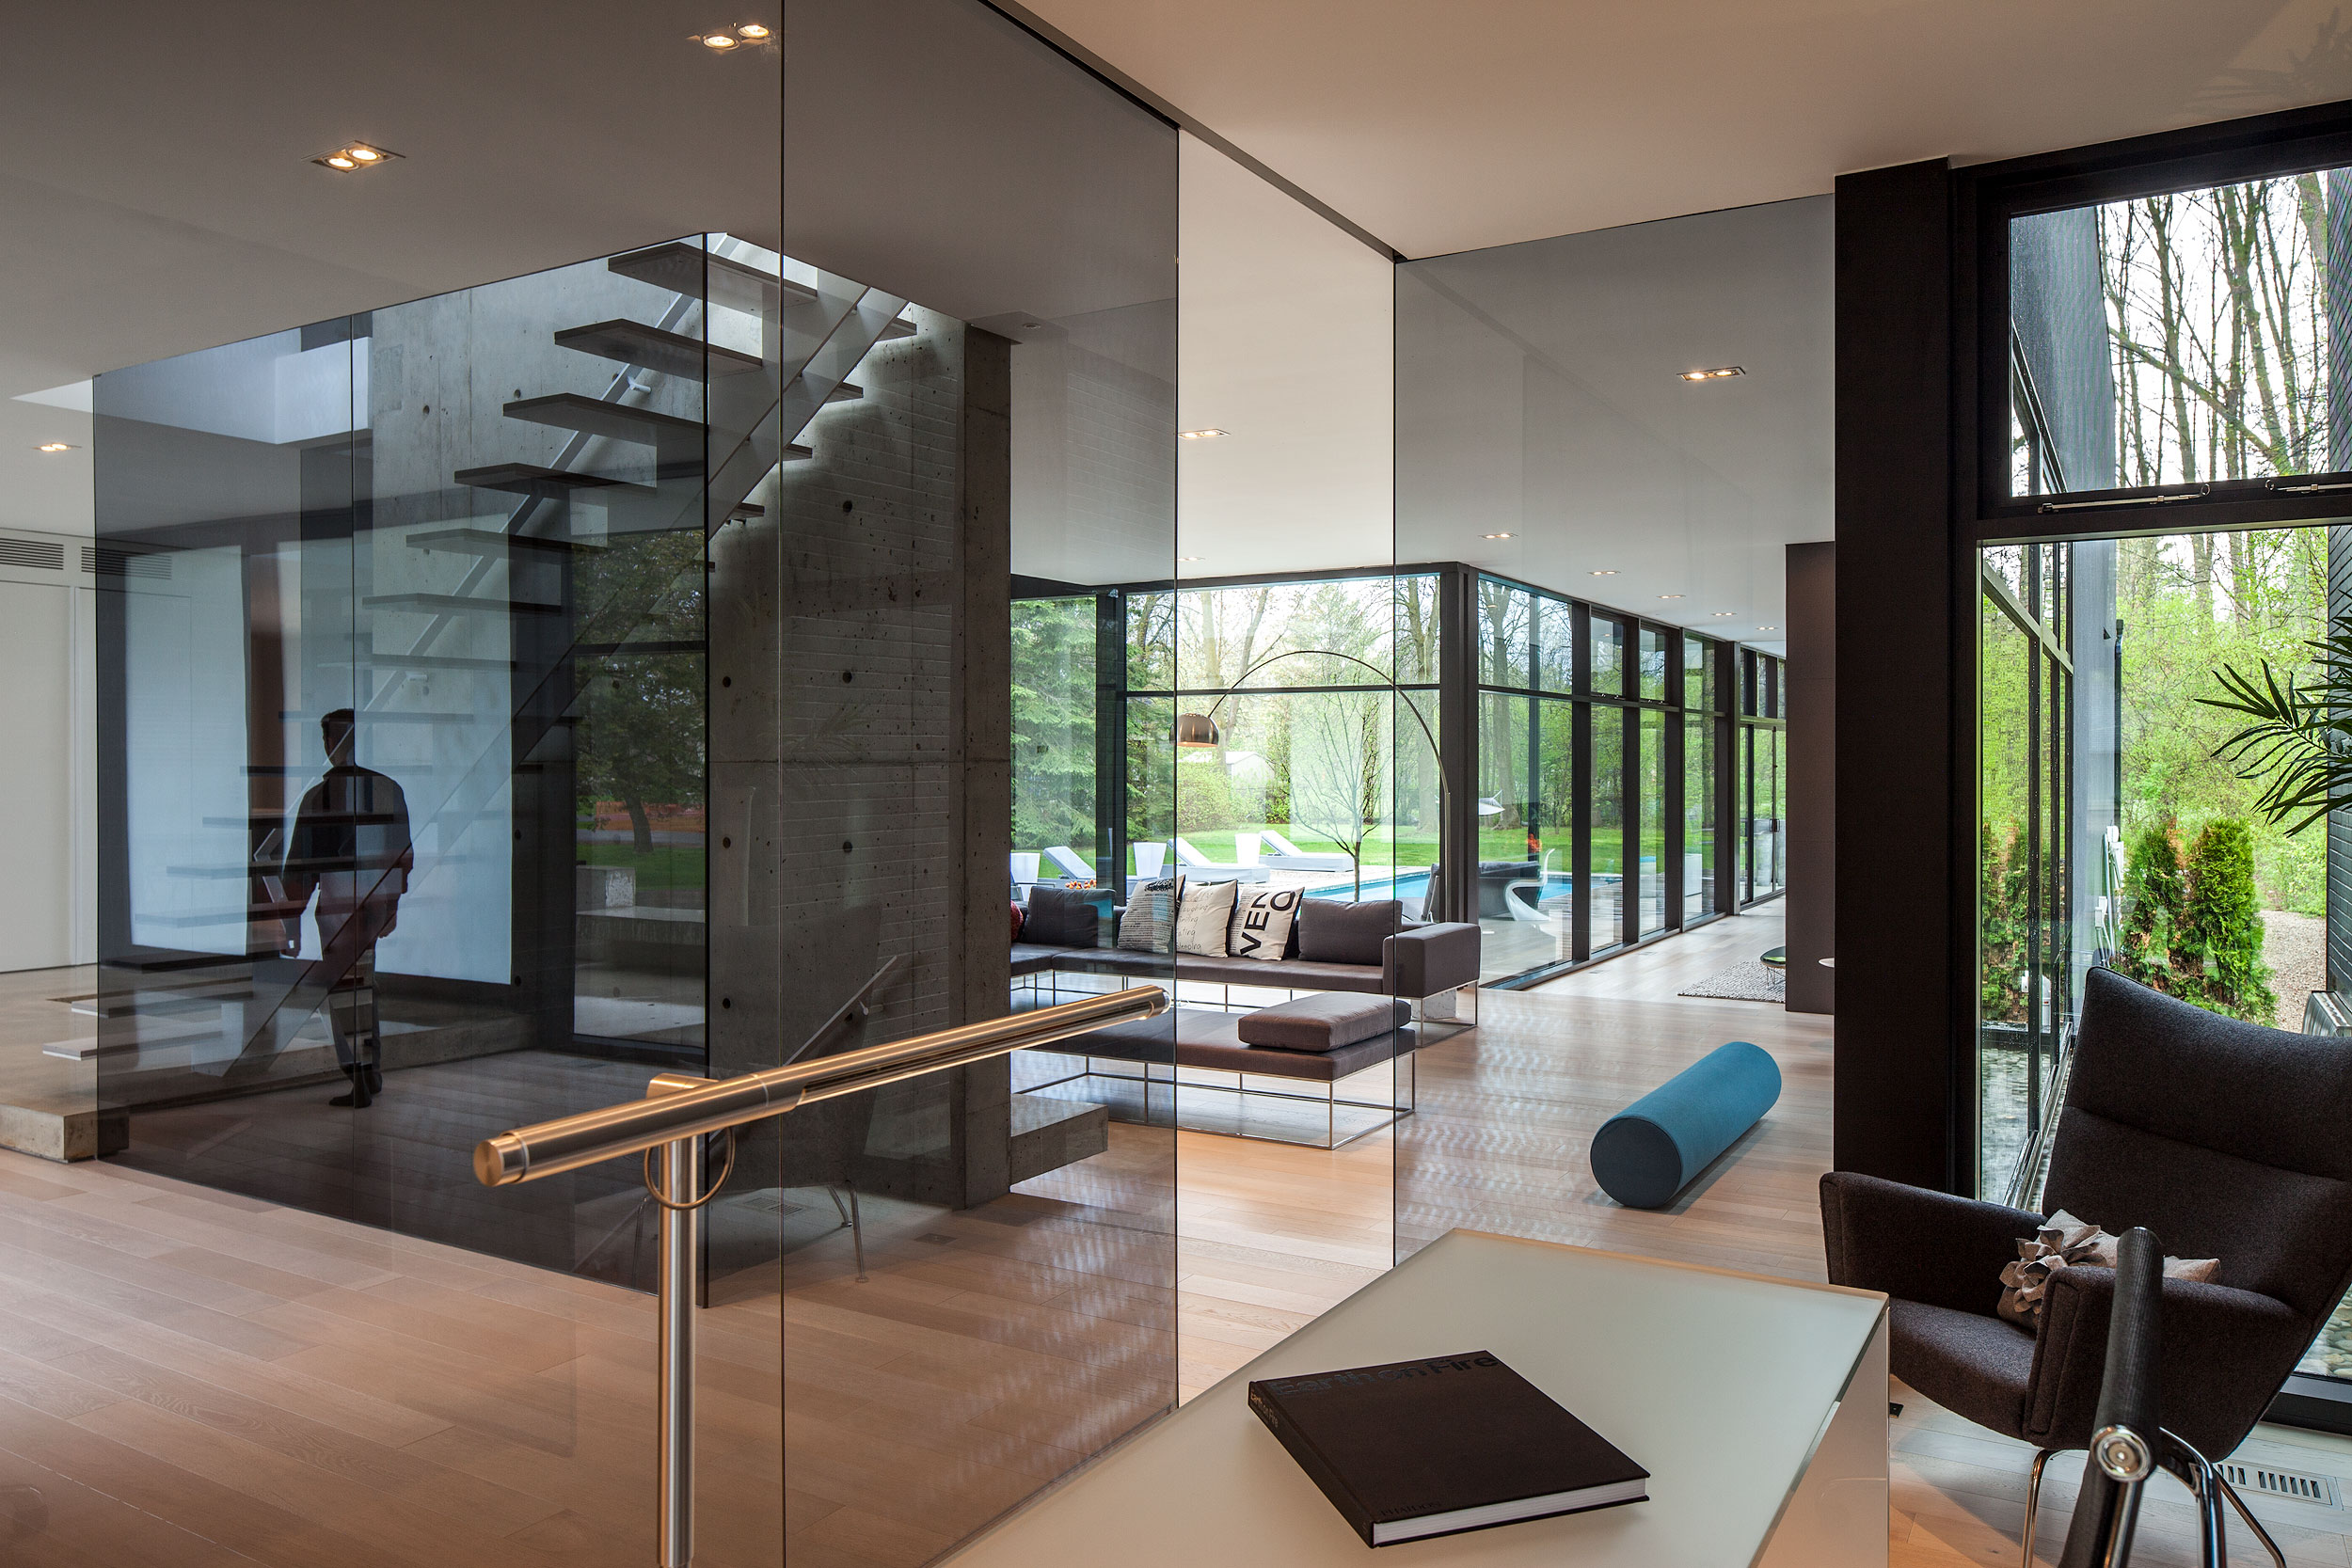 Glass walls, blond hardwood floors, reflection of a floating staircase, view in to the backyard, swimming pool, trees, lawn of a ultra modern house architectural photography by Peter A. Sellar 